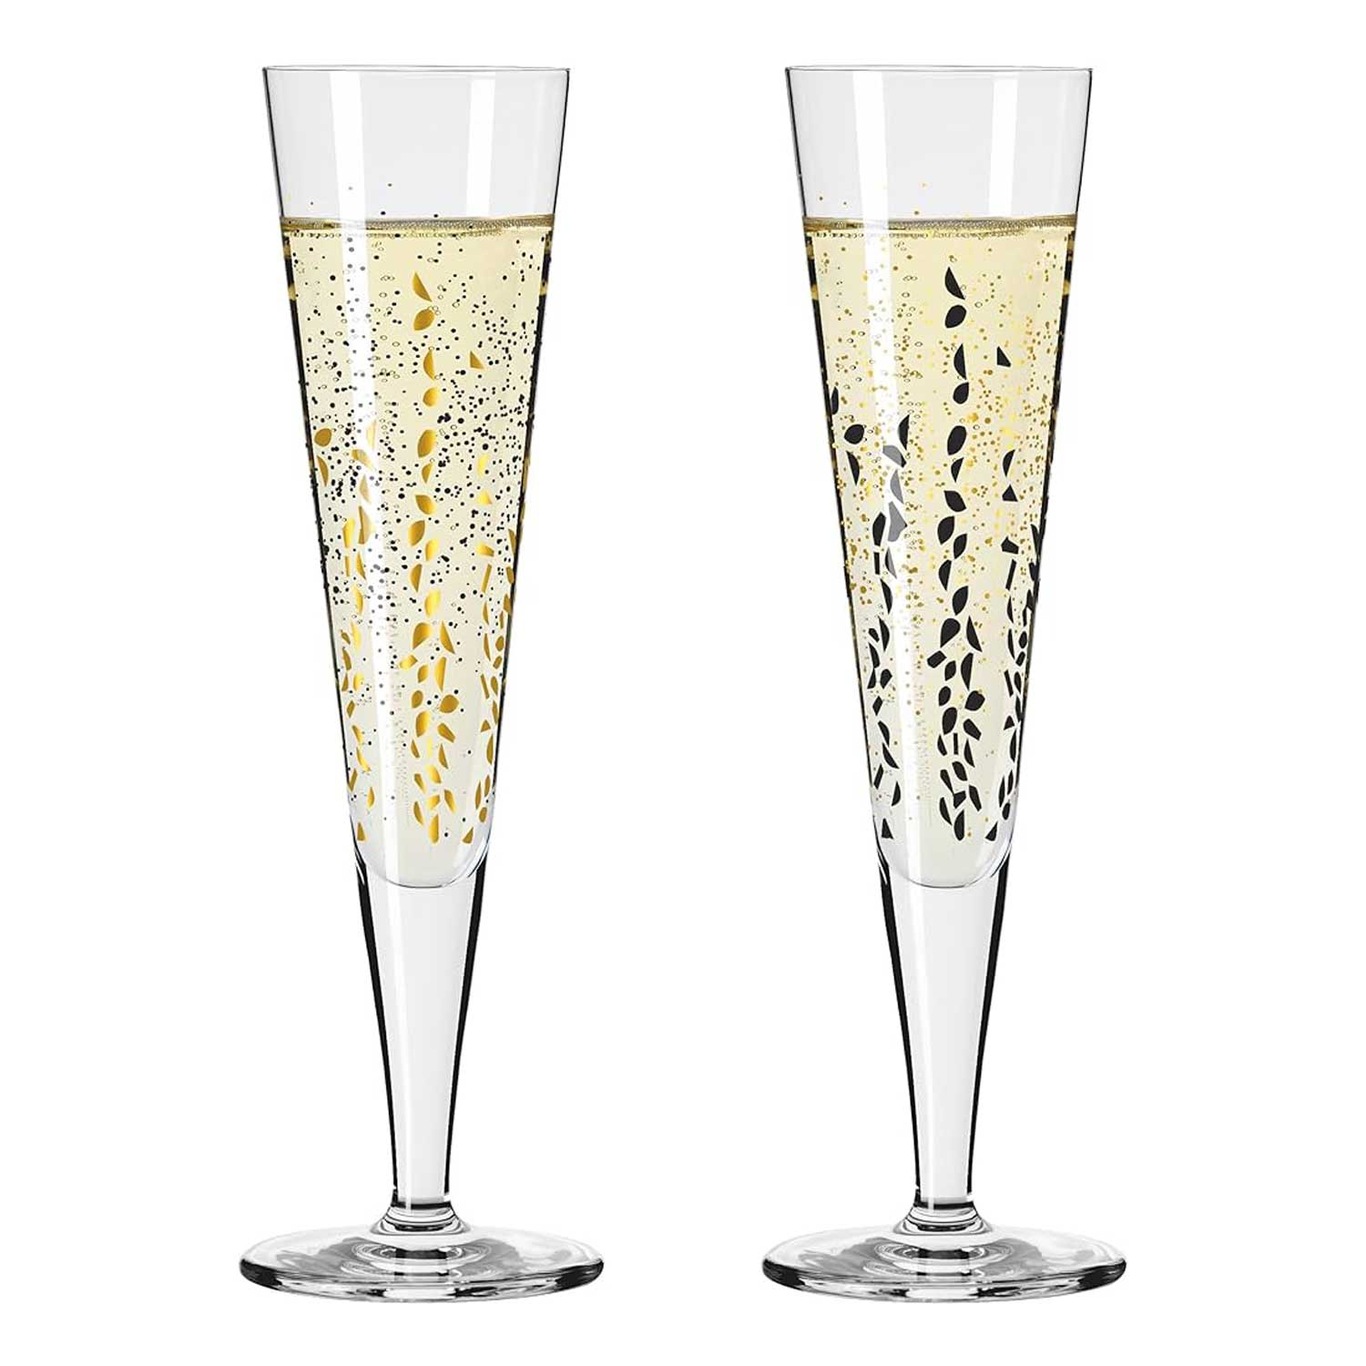 Goldnacht Champagneglas 2-pack, H22